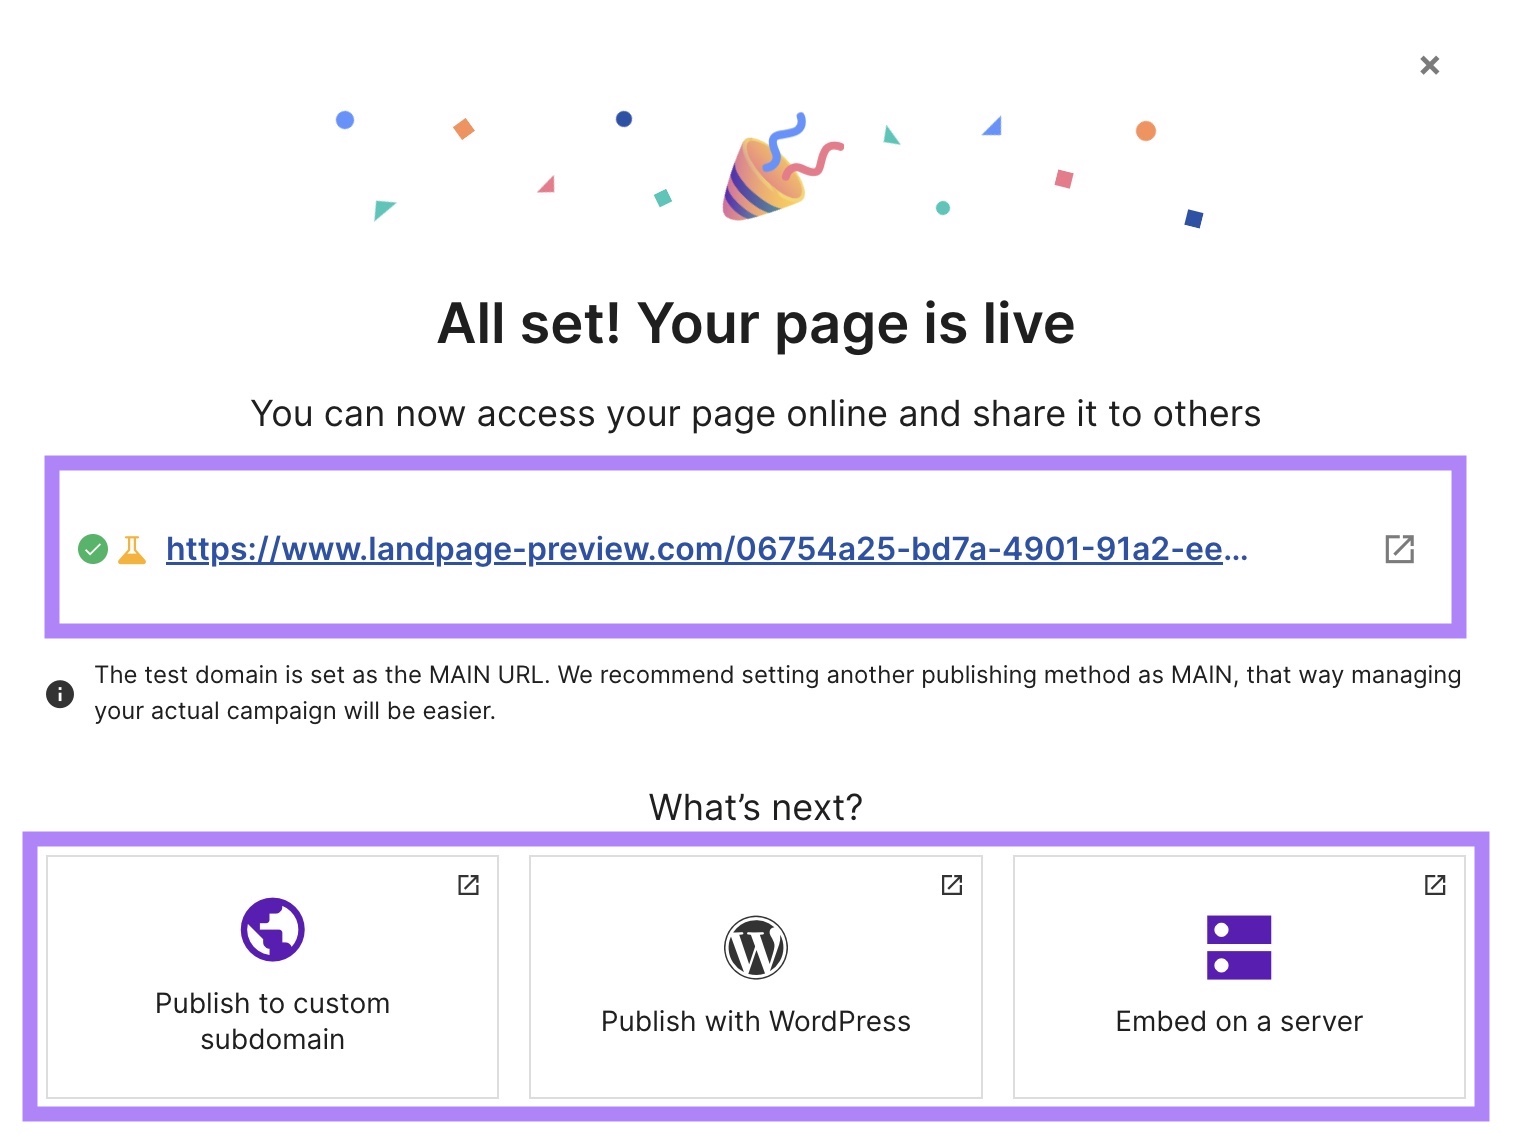 A shareable link for your live landing page and options to publish to custom subdomain, with WordPress, or embed on a server.